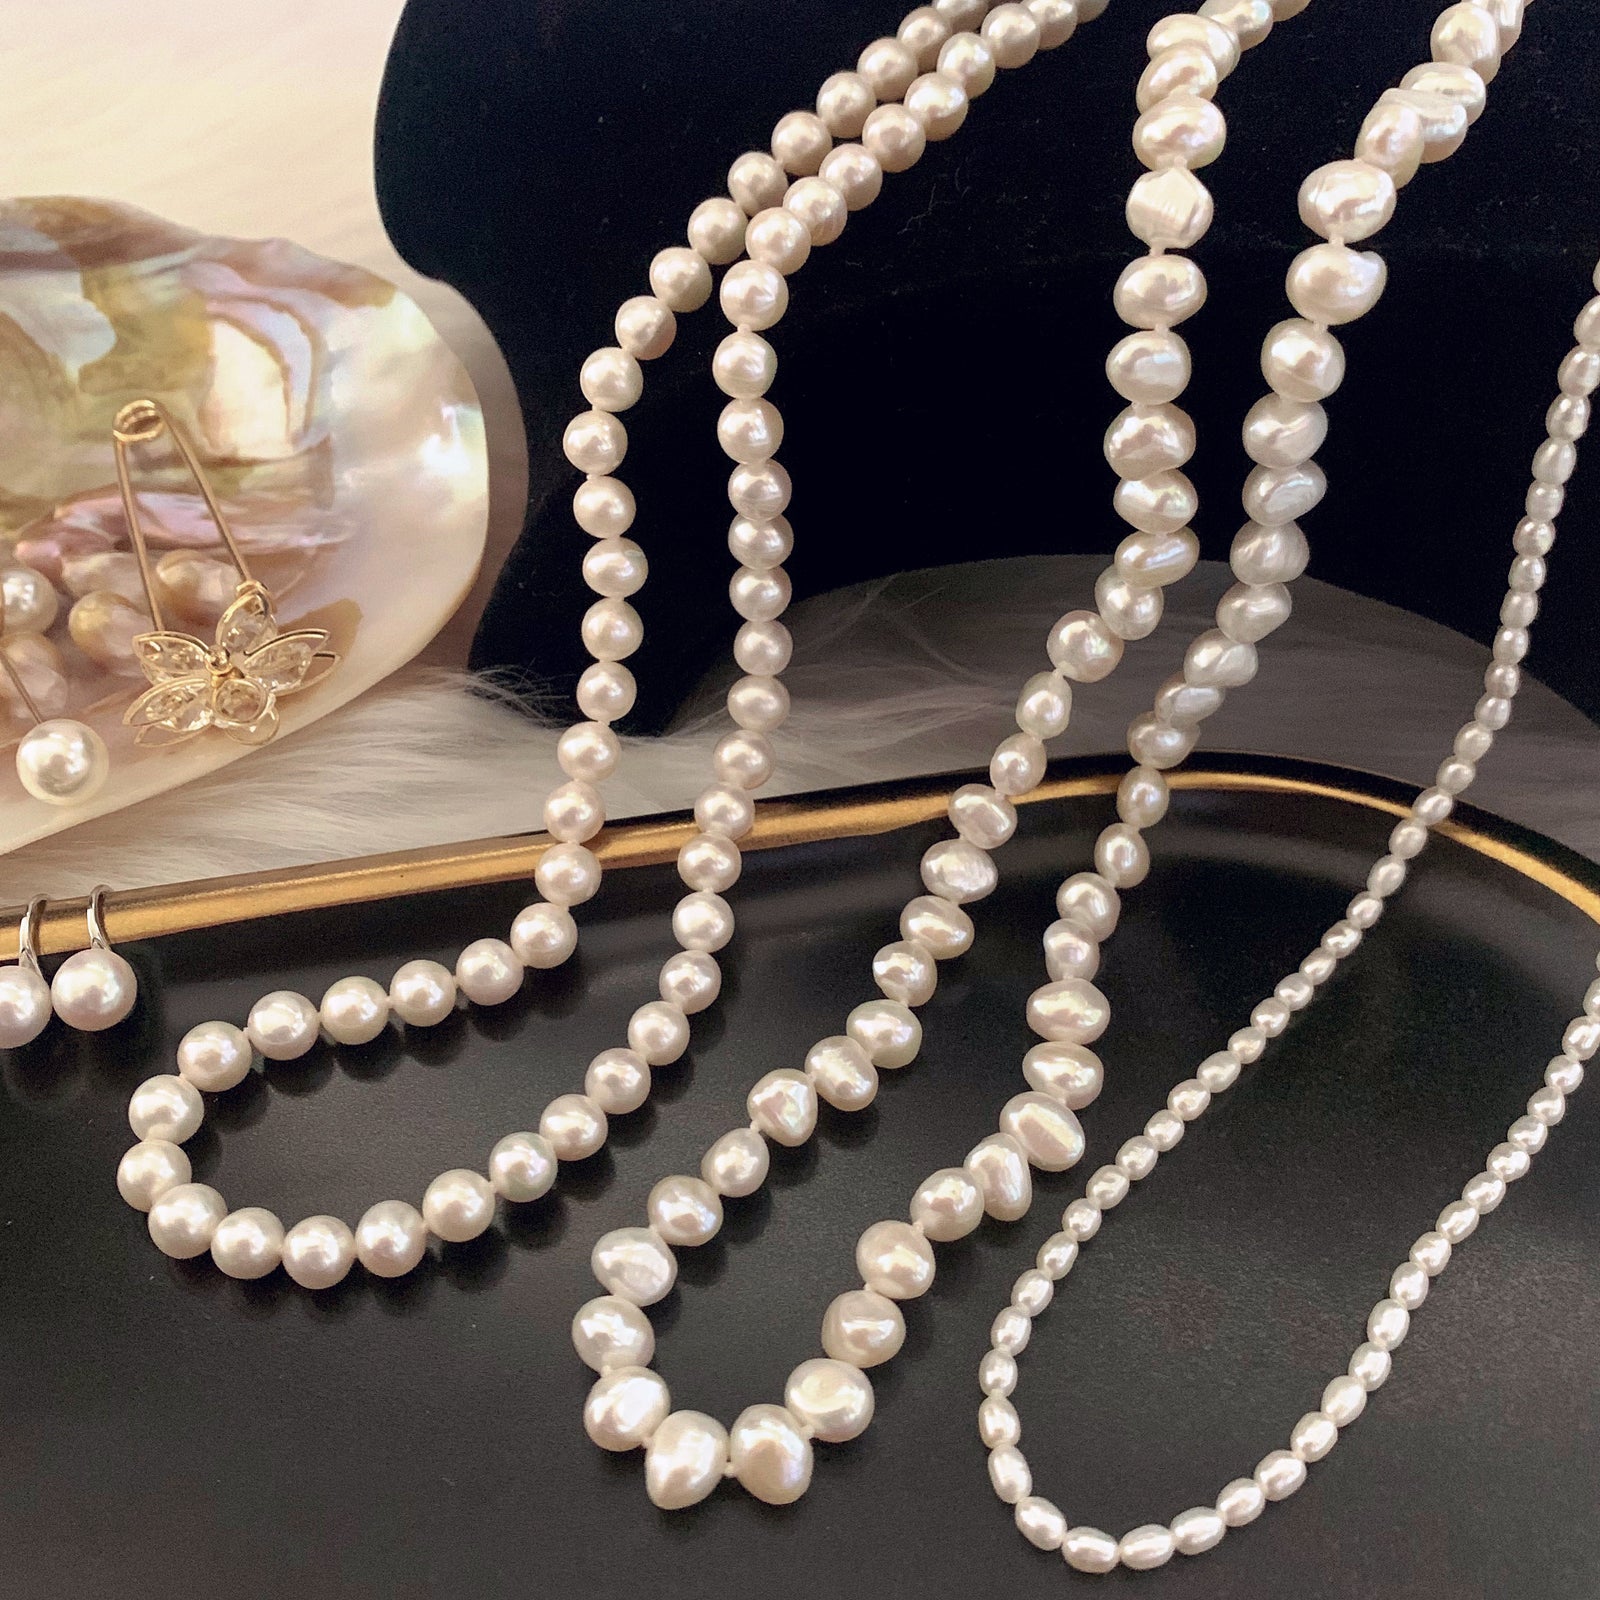 sizing chart for 10mm pearl